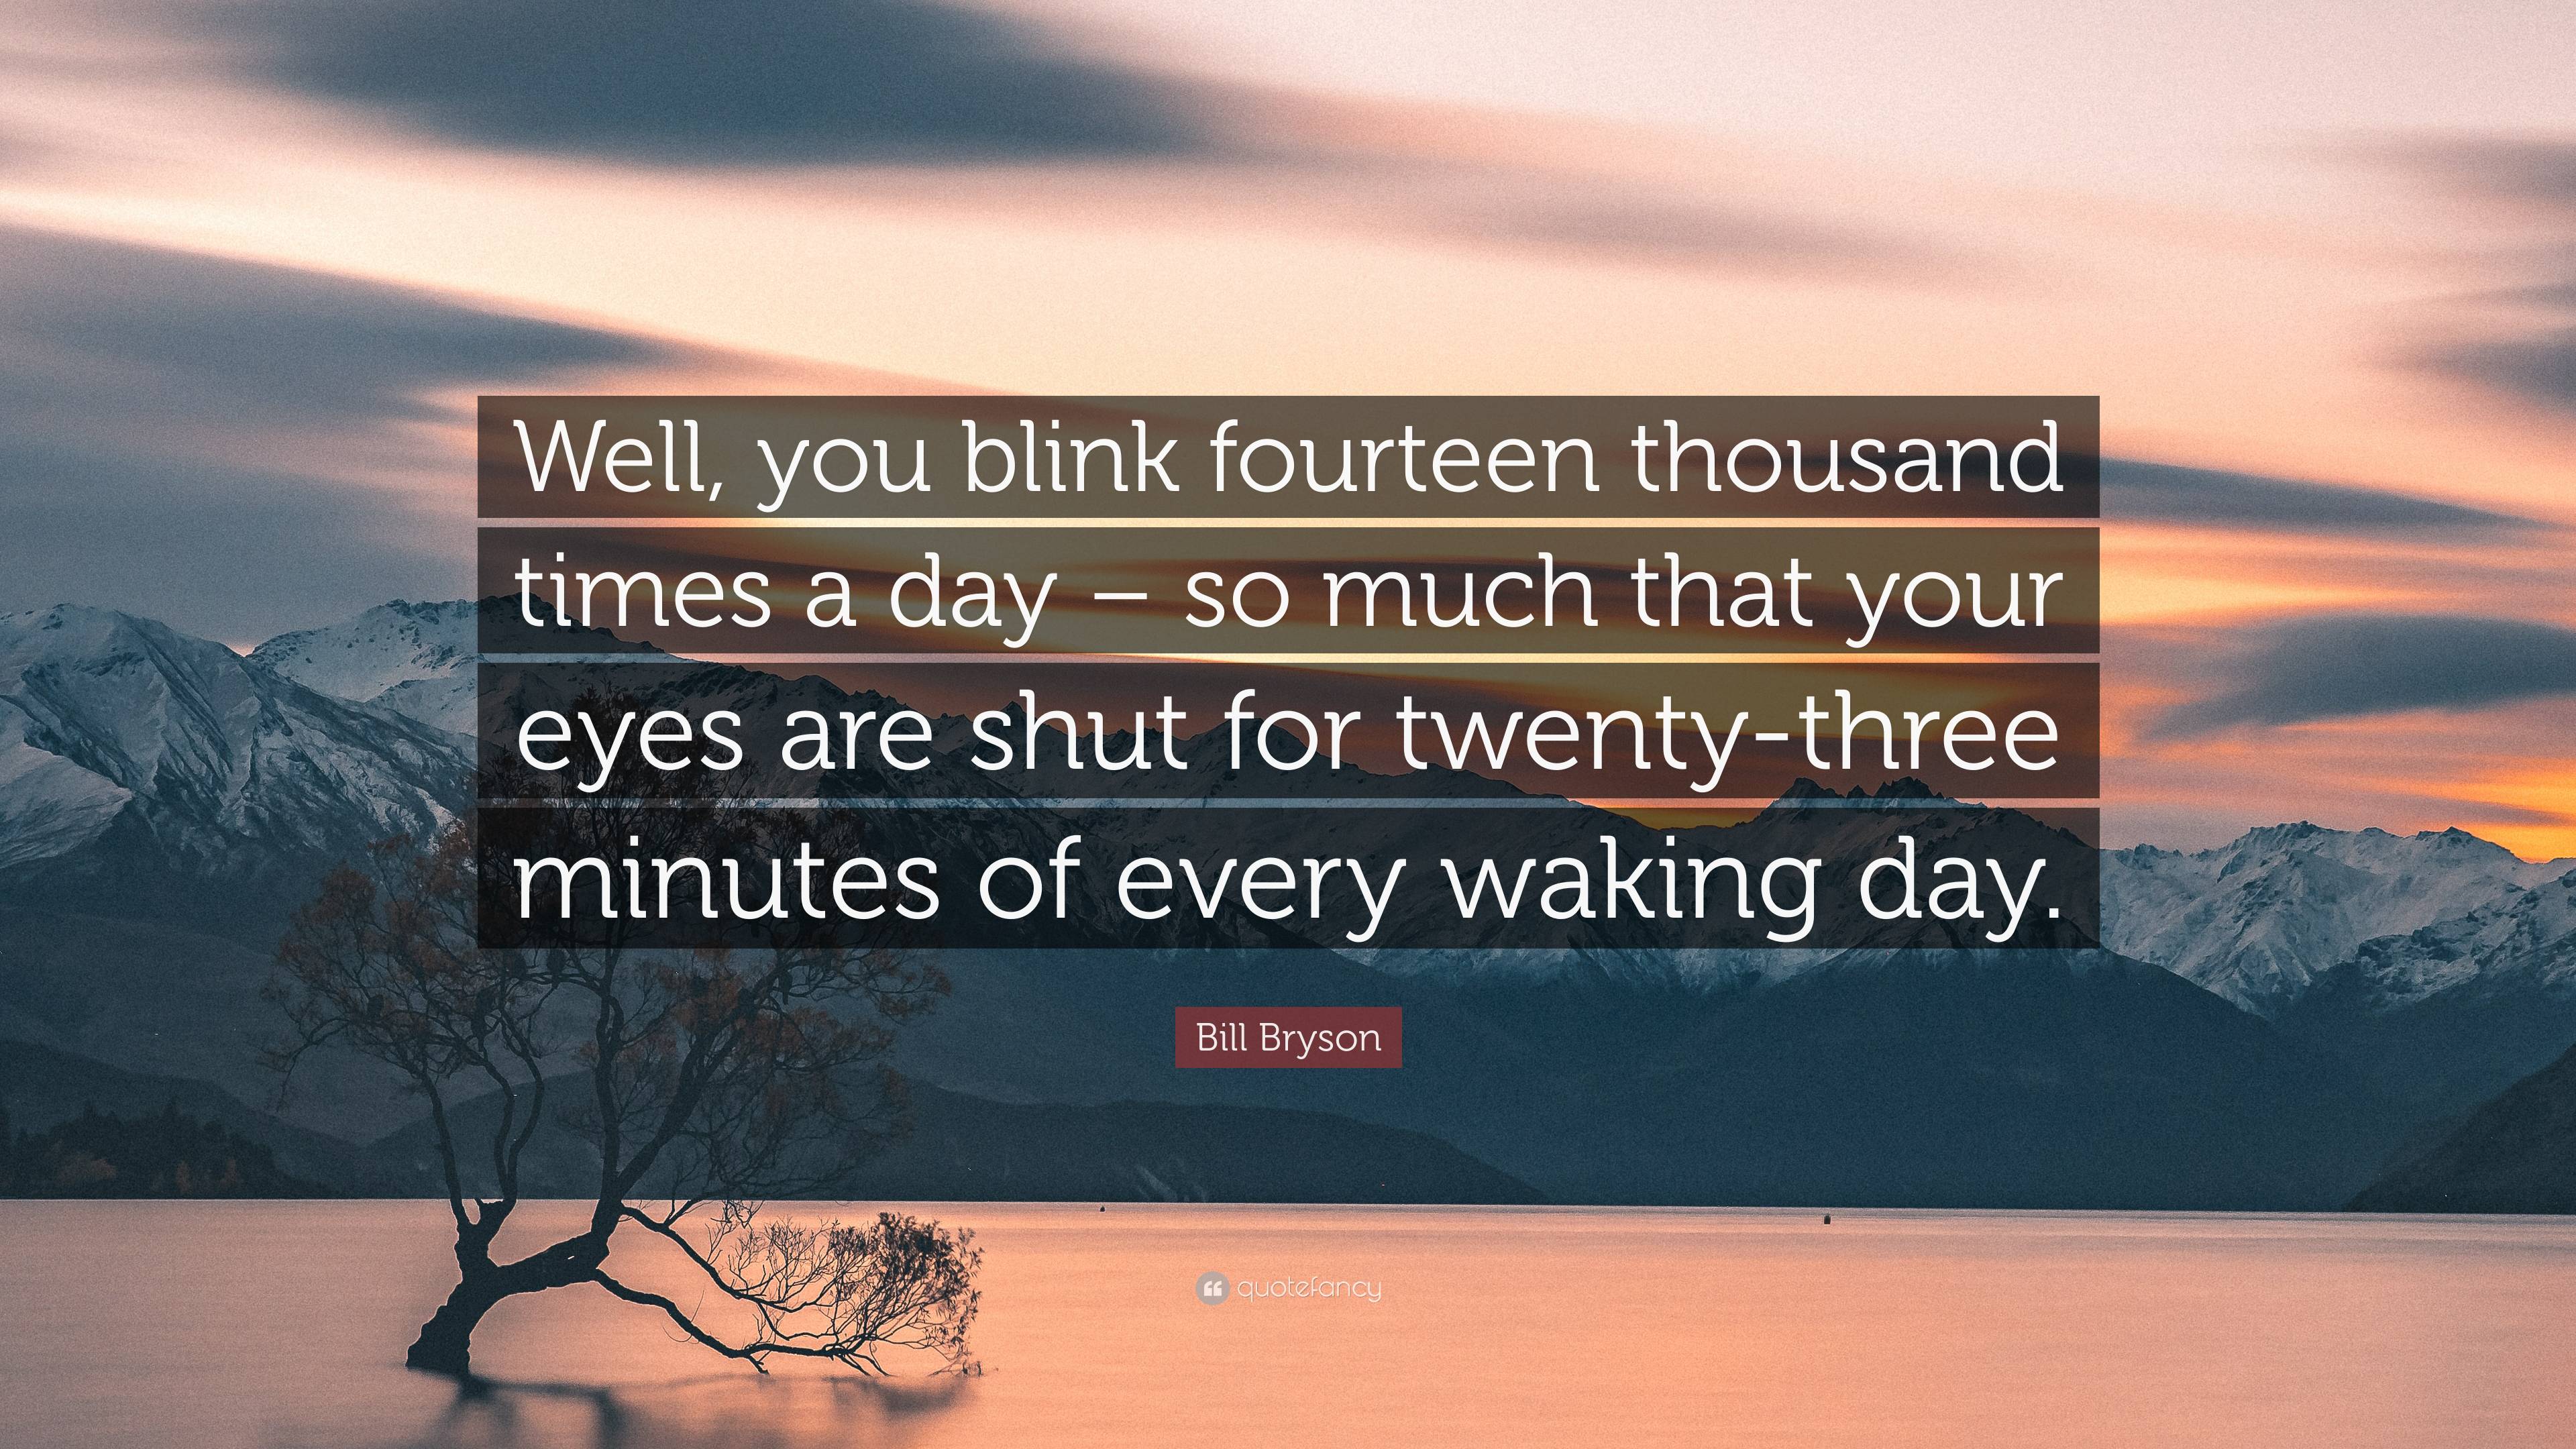 Bill Bryson Quote: “Well, you blink fourteen thousand times a day – so much  that your eyes are shut for twenty-three minutes of every waking”